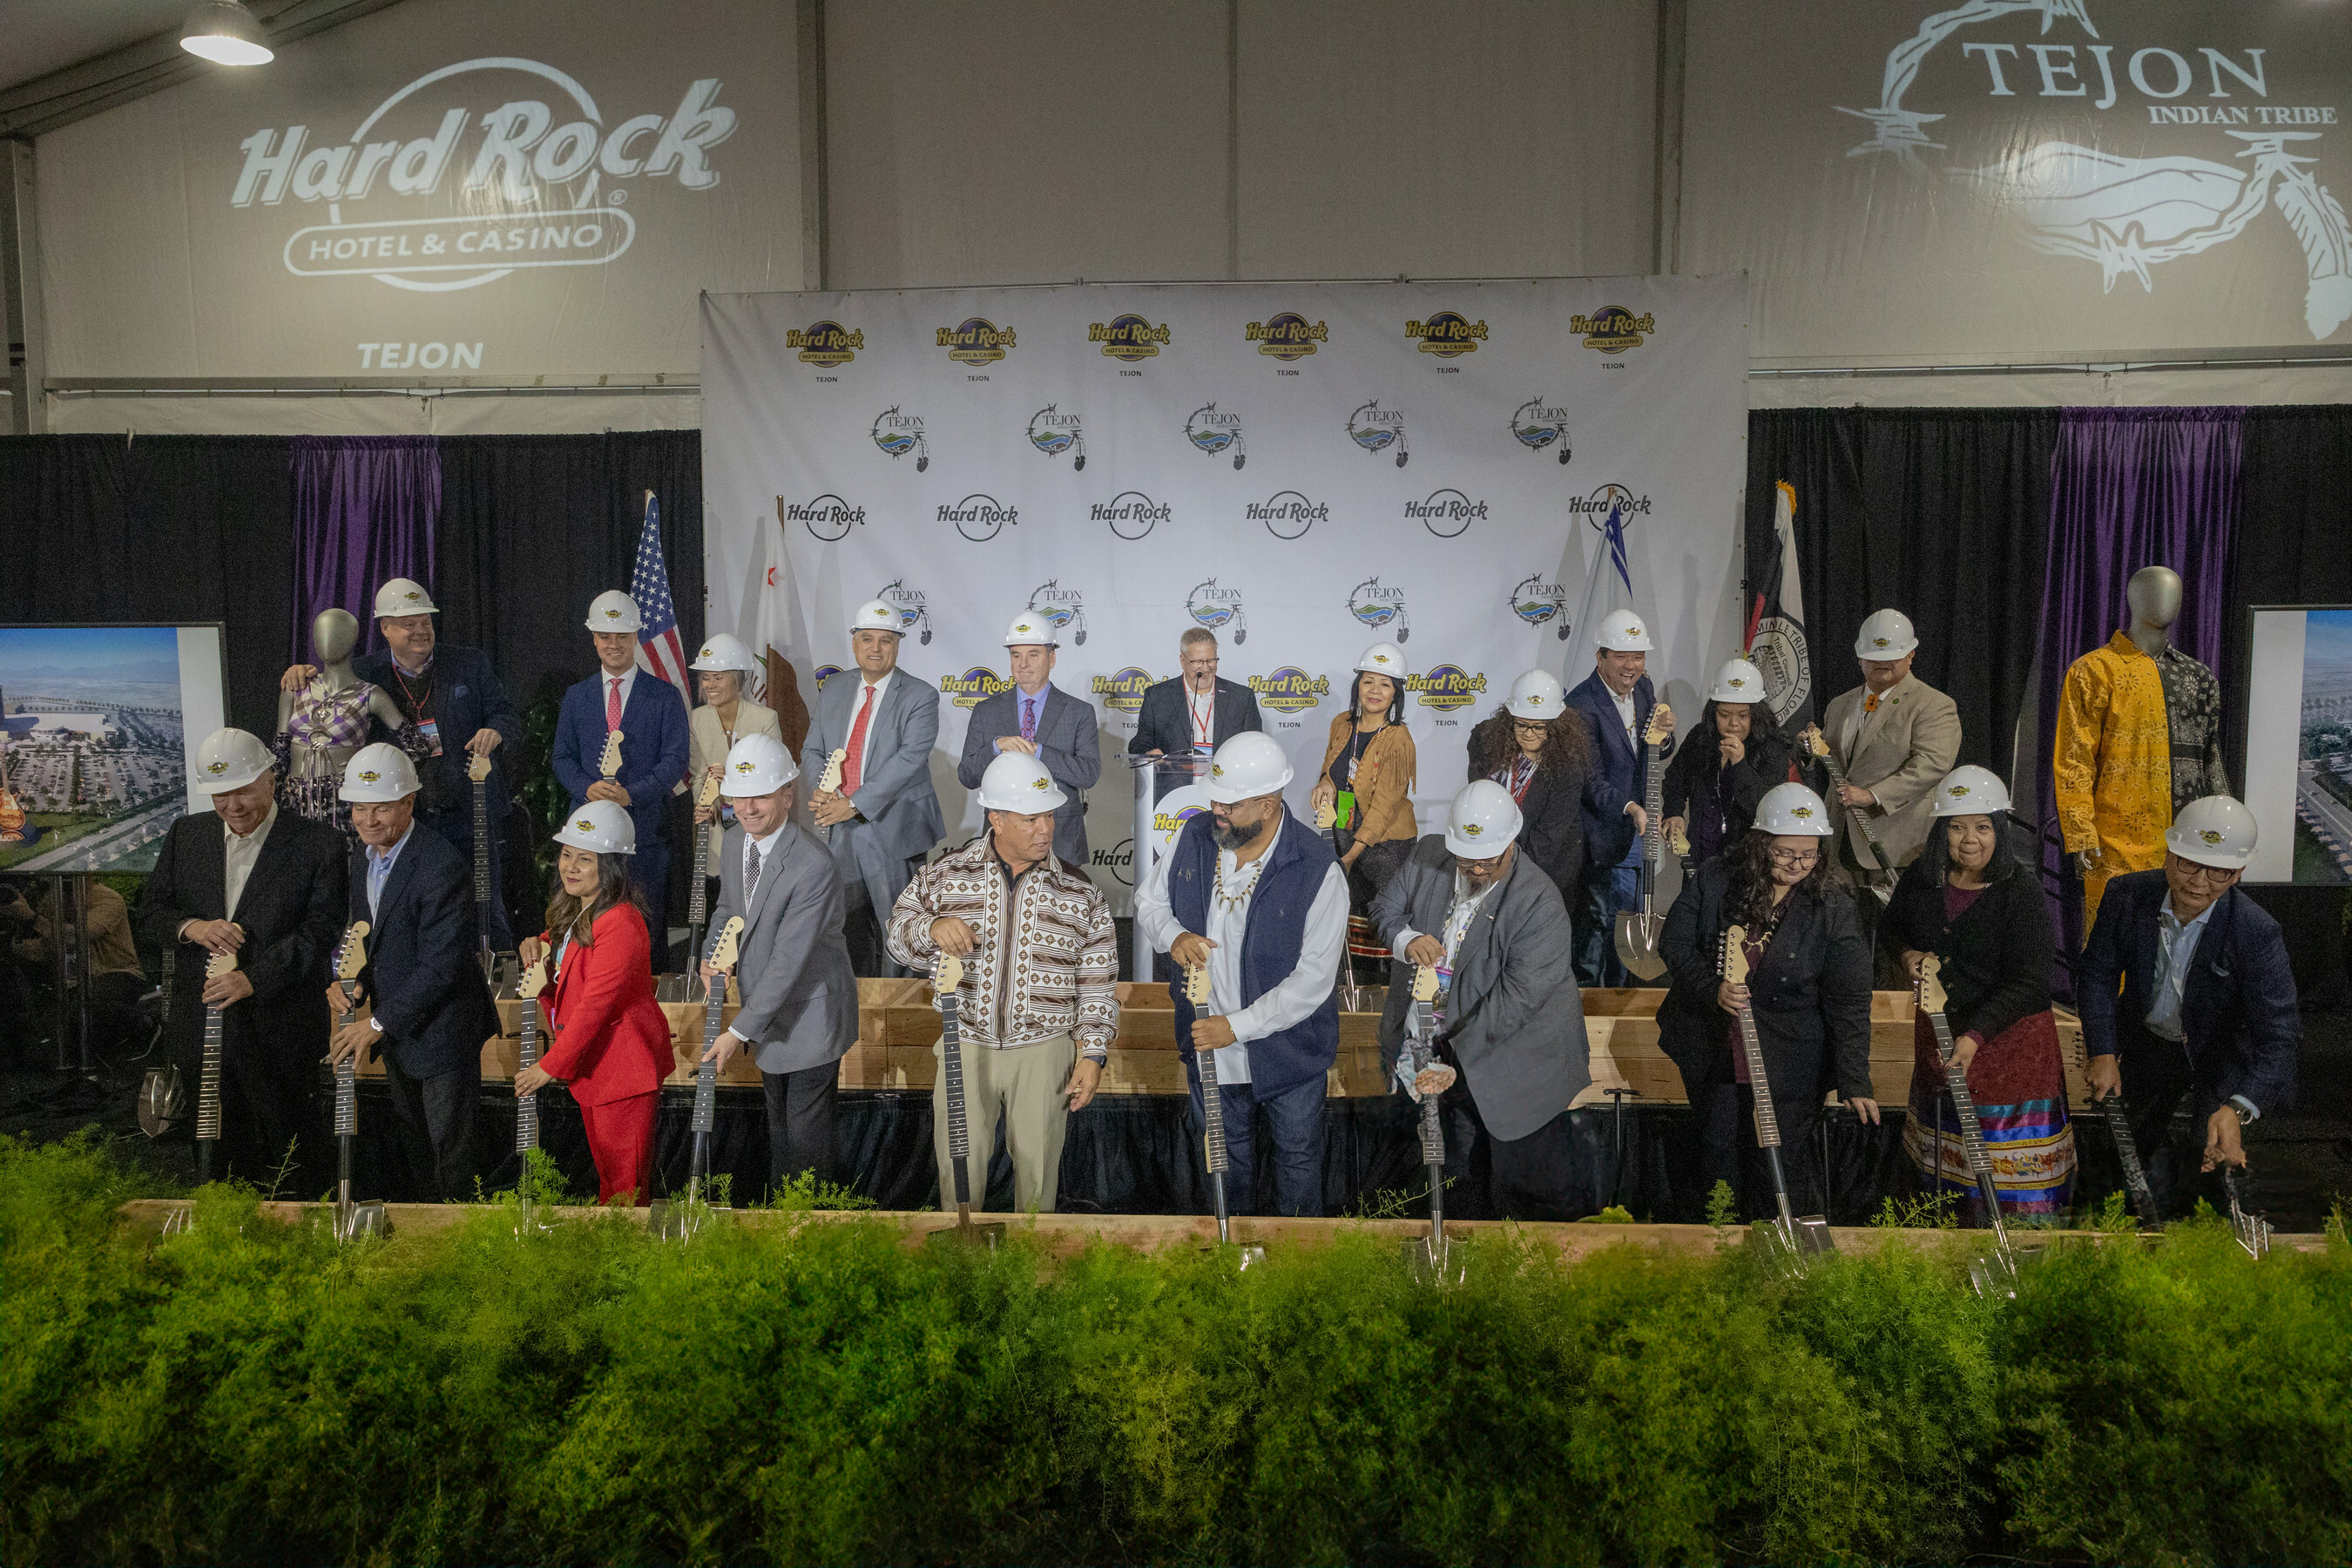 The celebration featured a commemorative shovel groundbreaking with Hard Rock representatives, Tejon Indian Tribe leadership and general membership plus statewide and local community leaders.